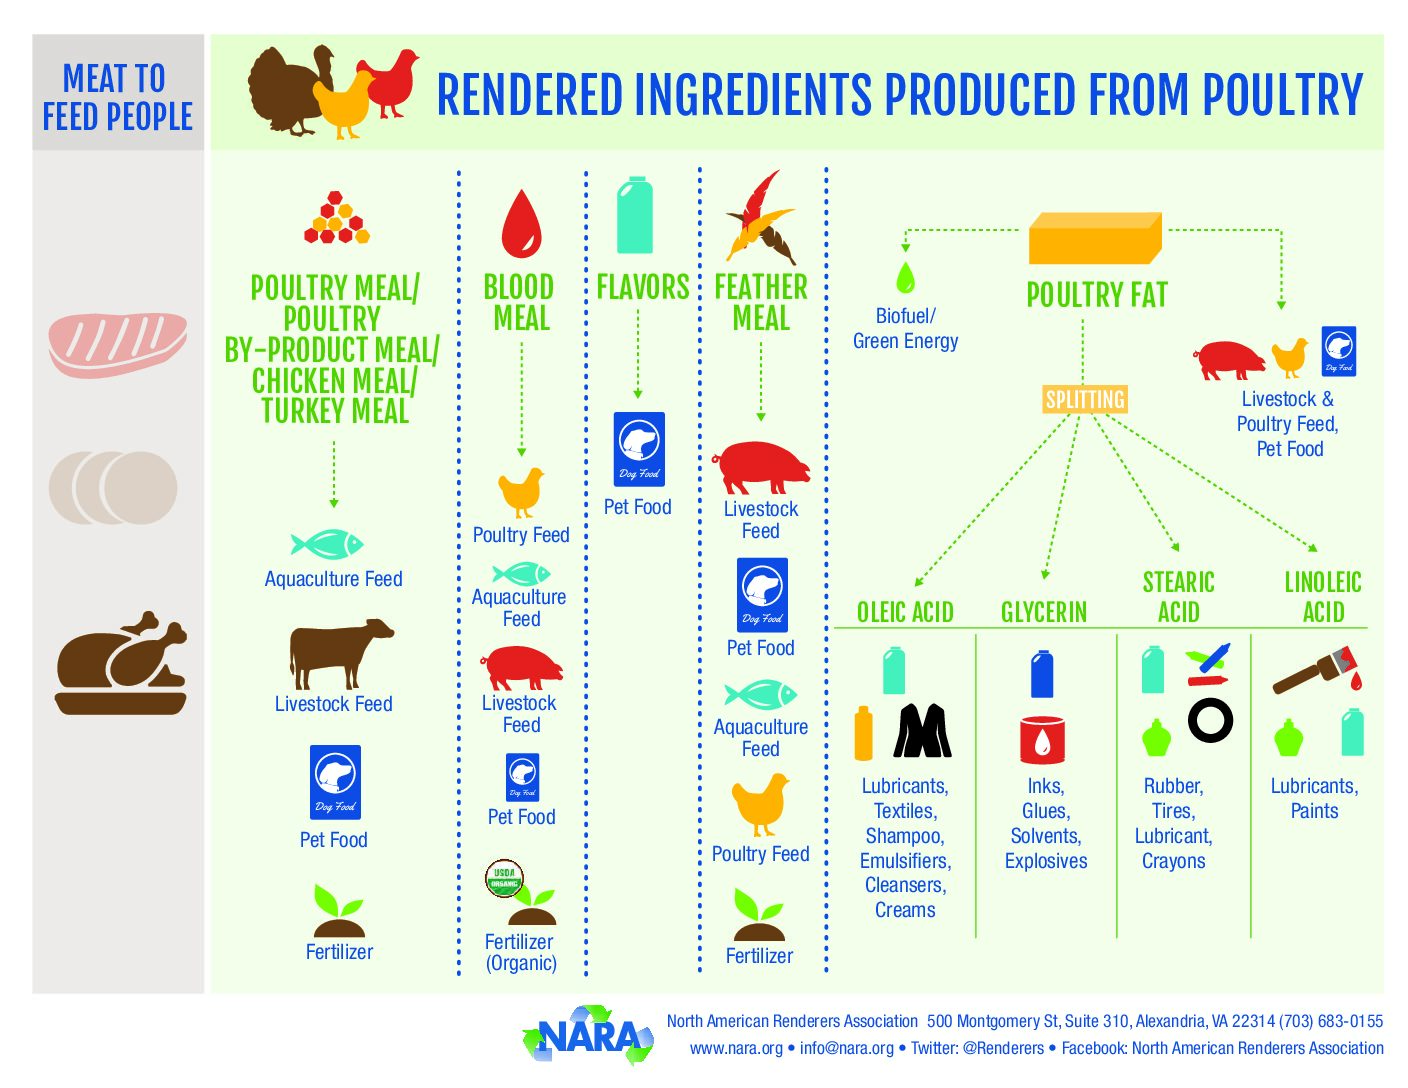 Rendering Ingredients: Produced from Poultry